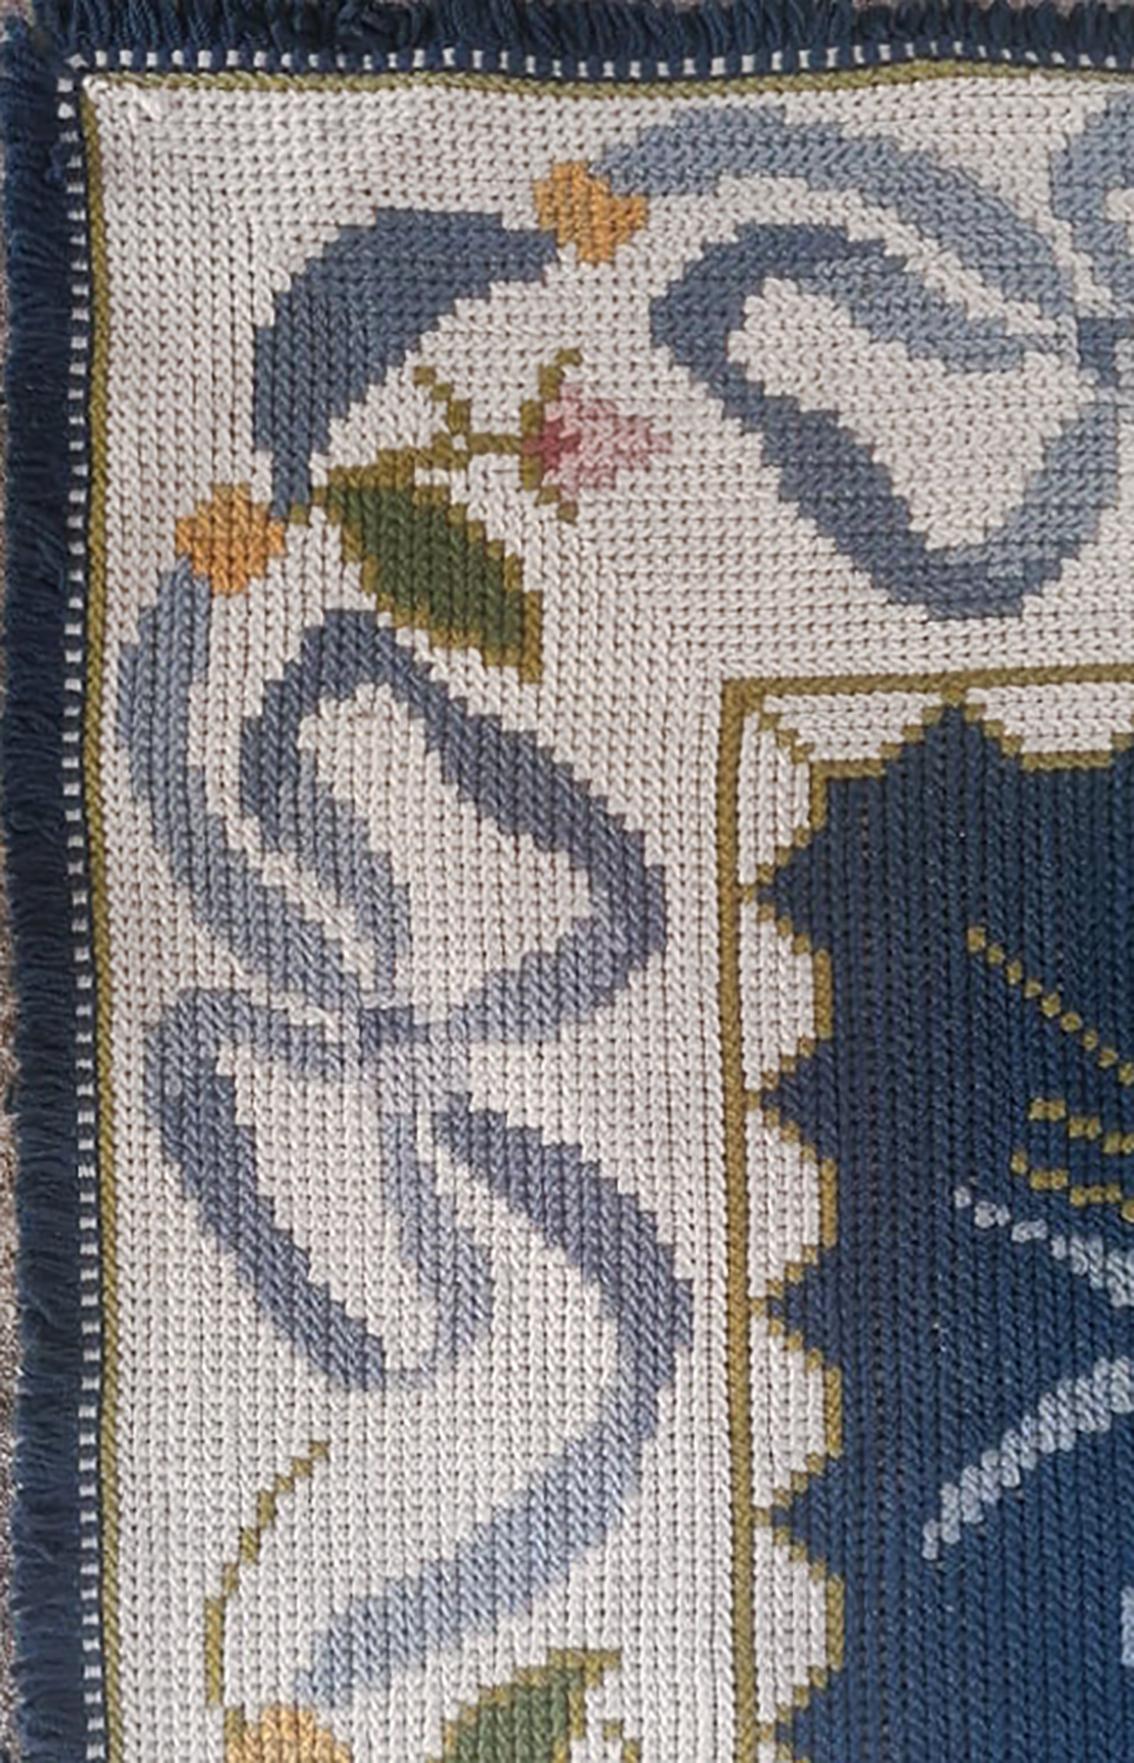 20th Century Floral European Portuguese Needlepoint Embroidered Arraiolos Rug in Blue & Cream